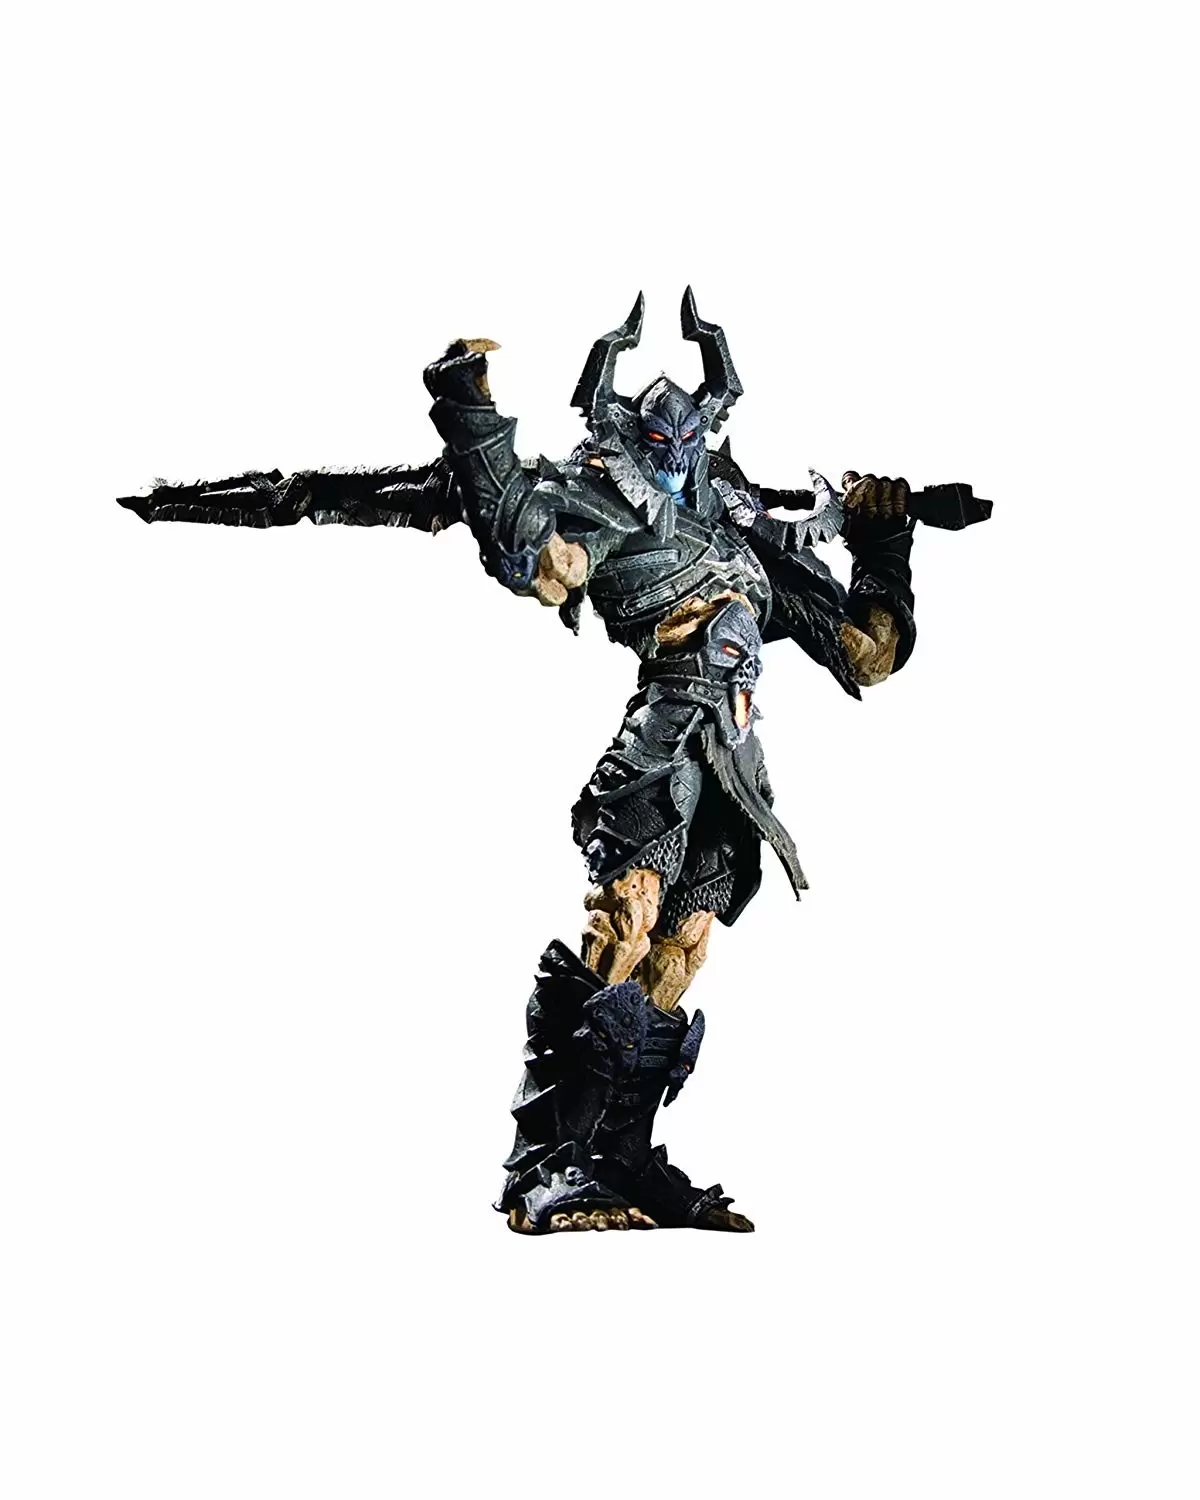 World of Warcraft Action Figures (WOW) - The Black Knight